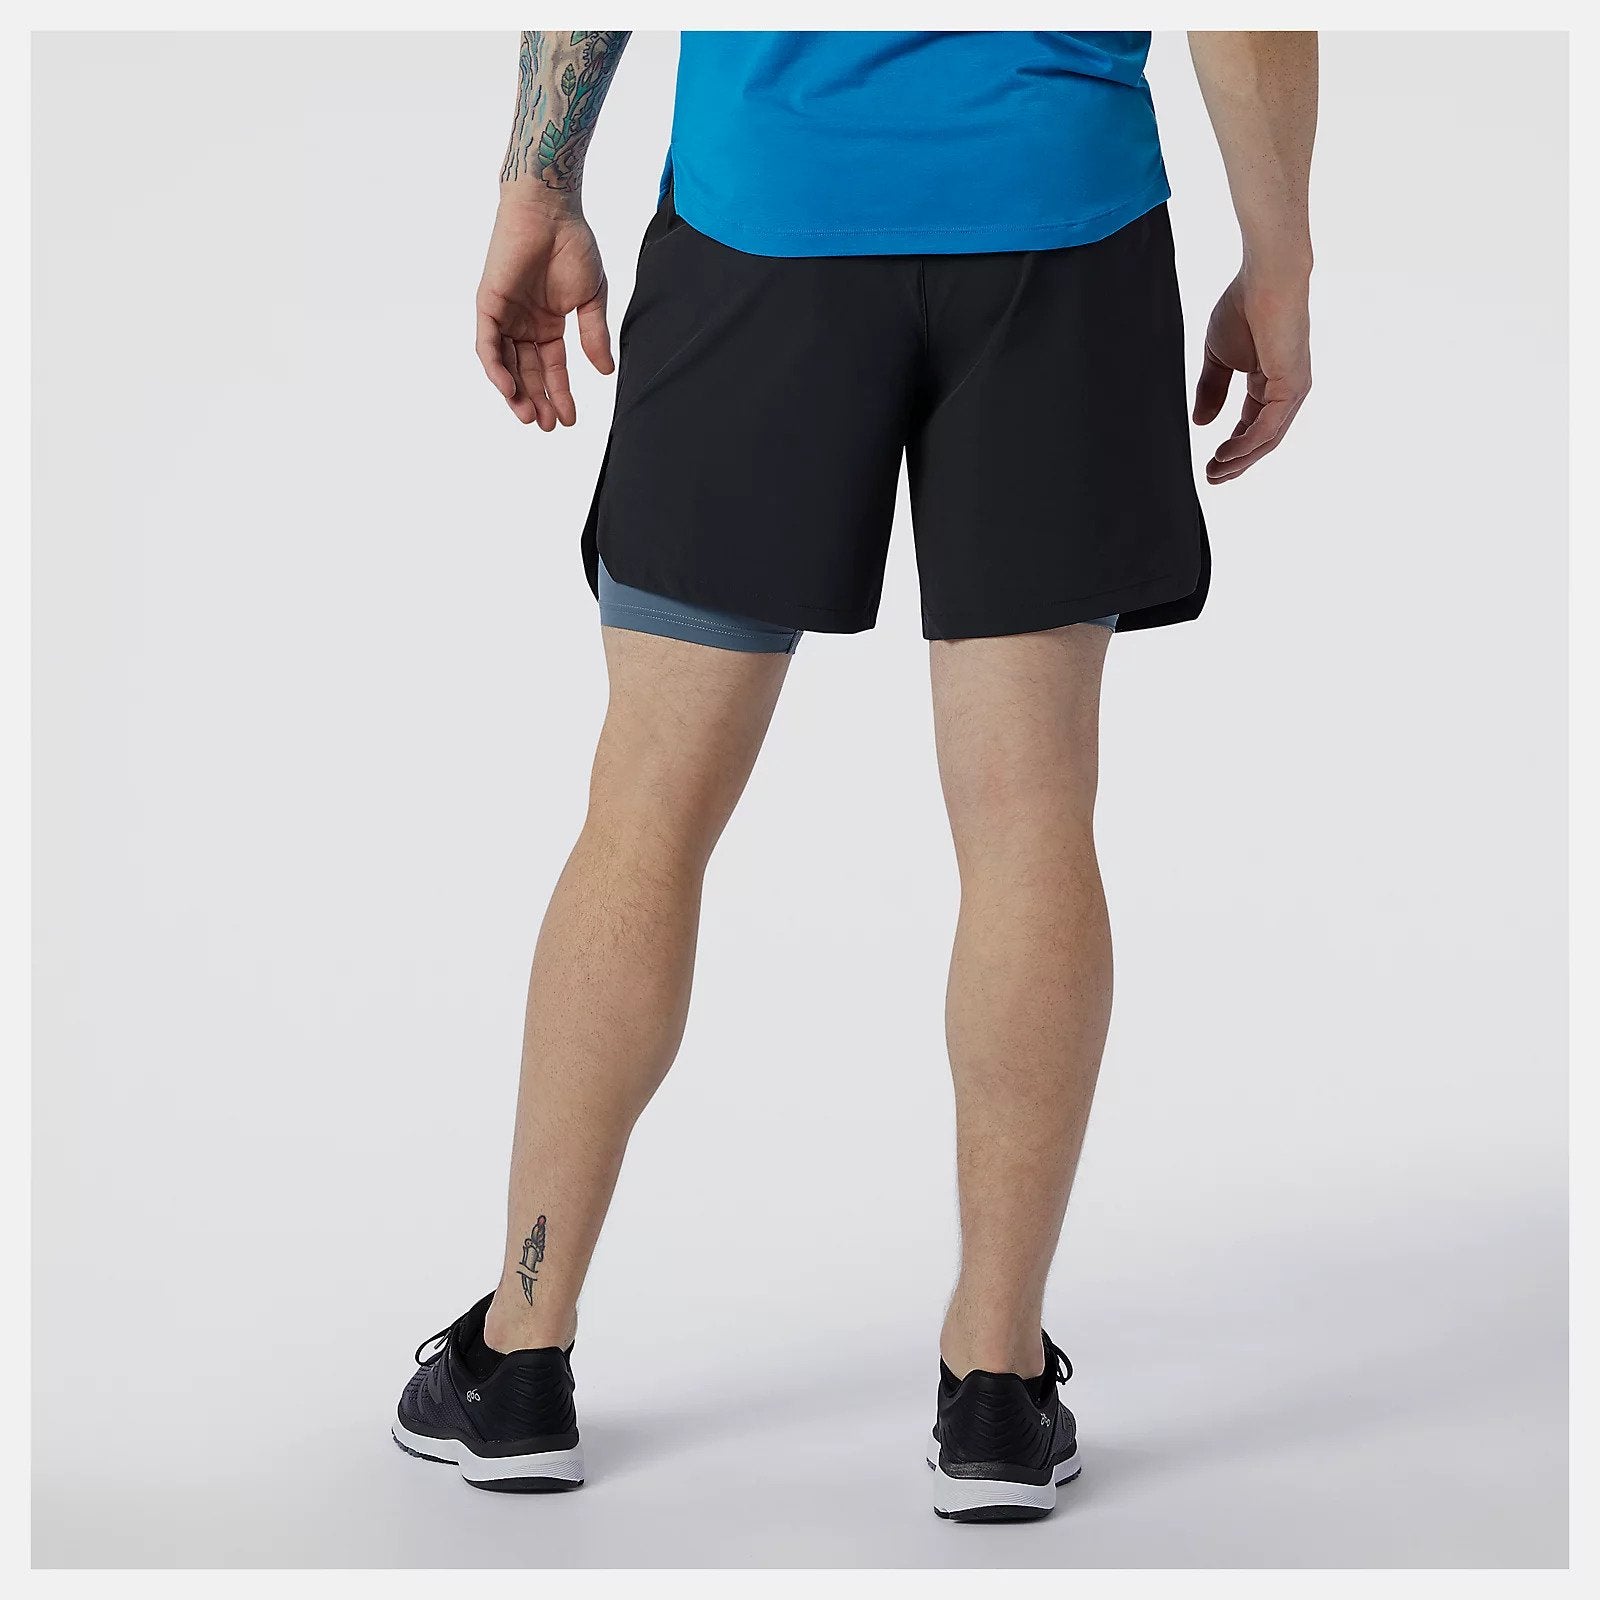 Rear view of the Fortitech 7" 2 in 1 Men's Short by New Balance in Black/Grey